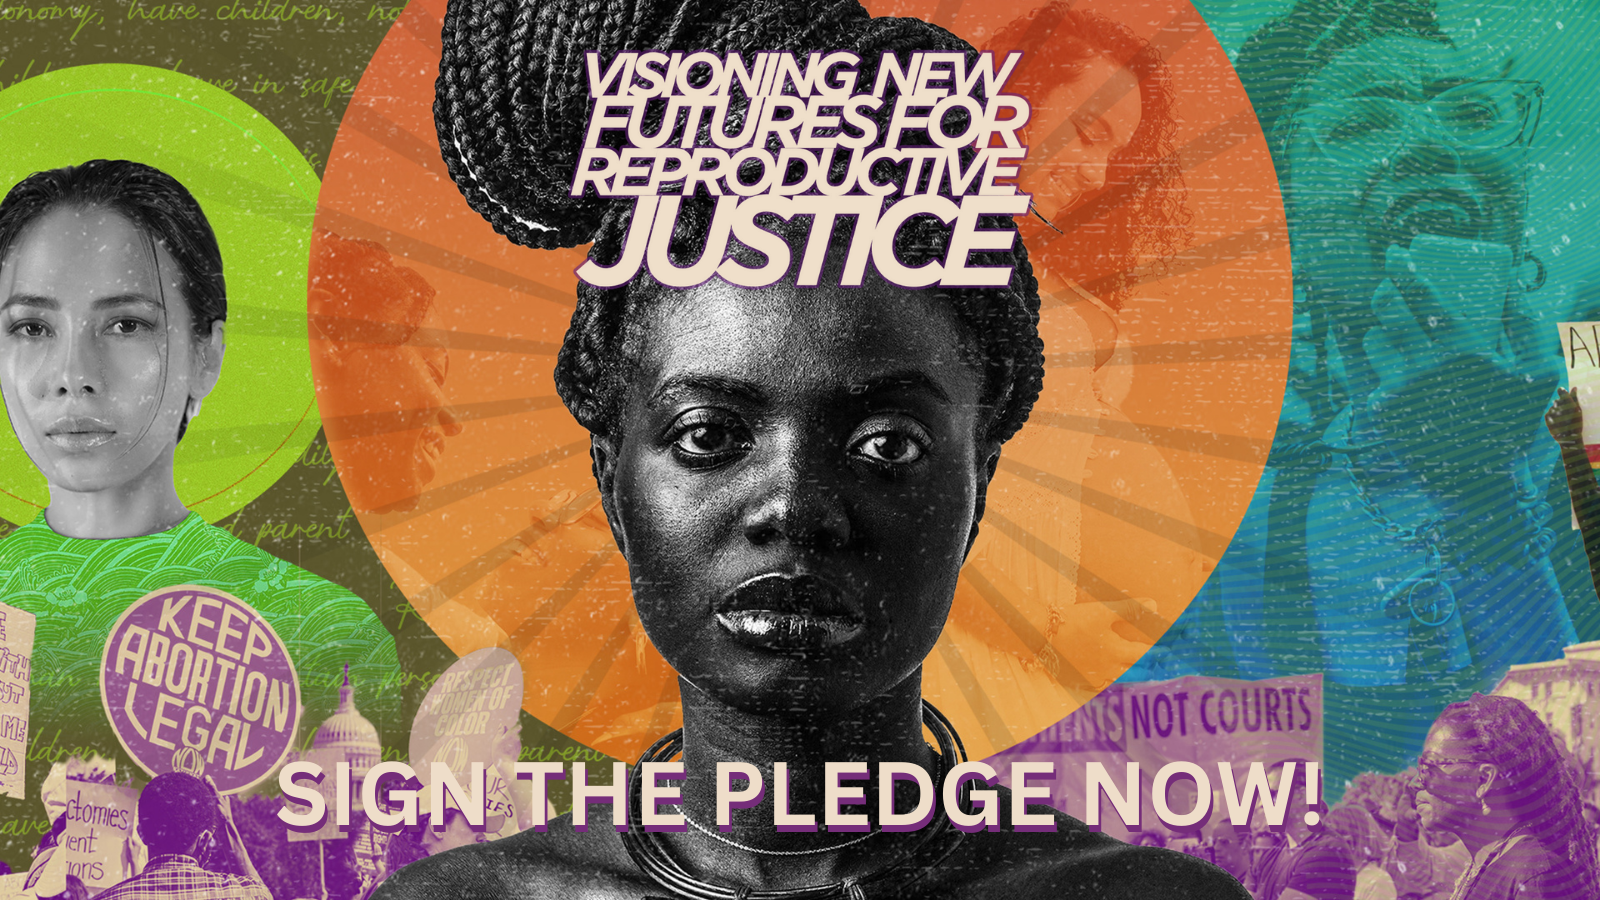 Visioning New Futures For Reproductive Justice